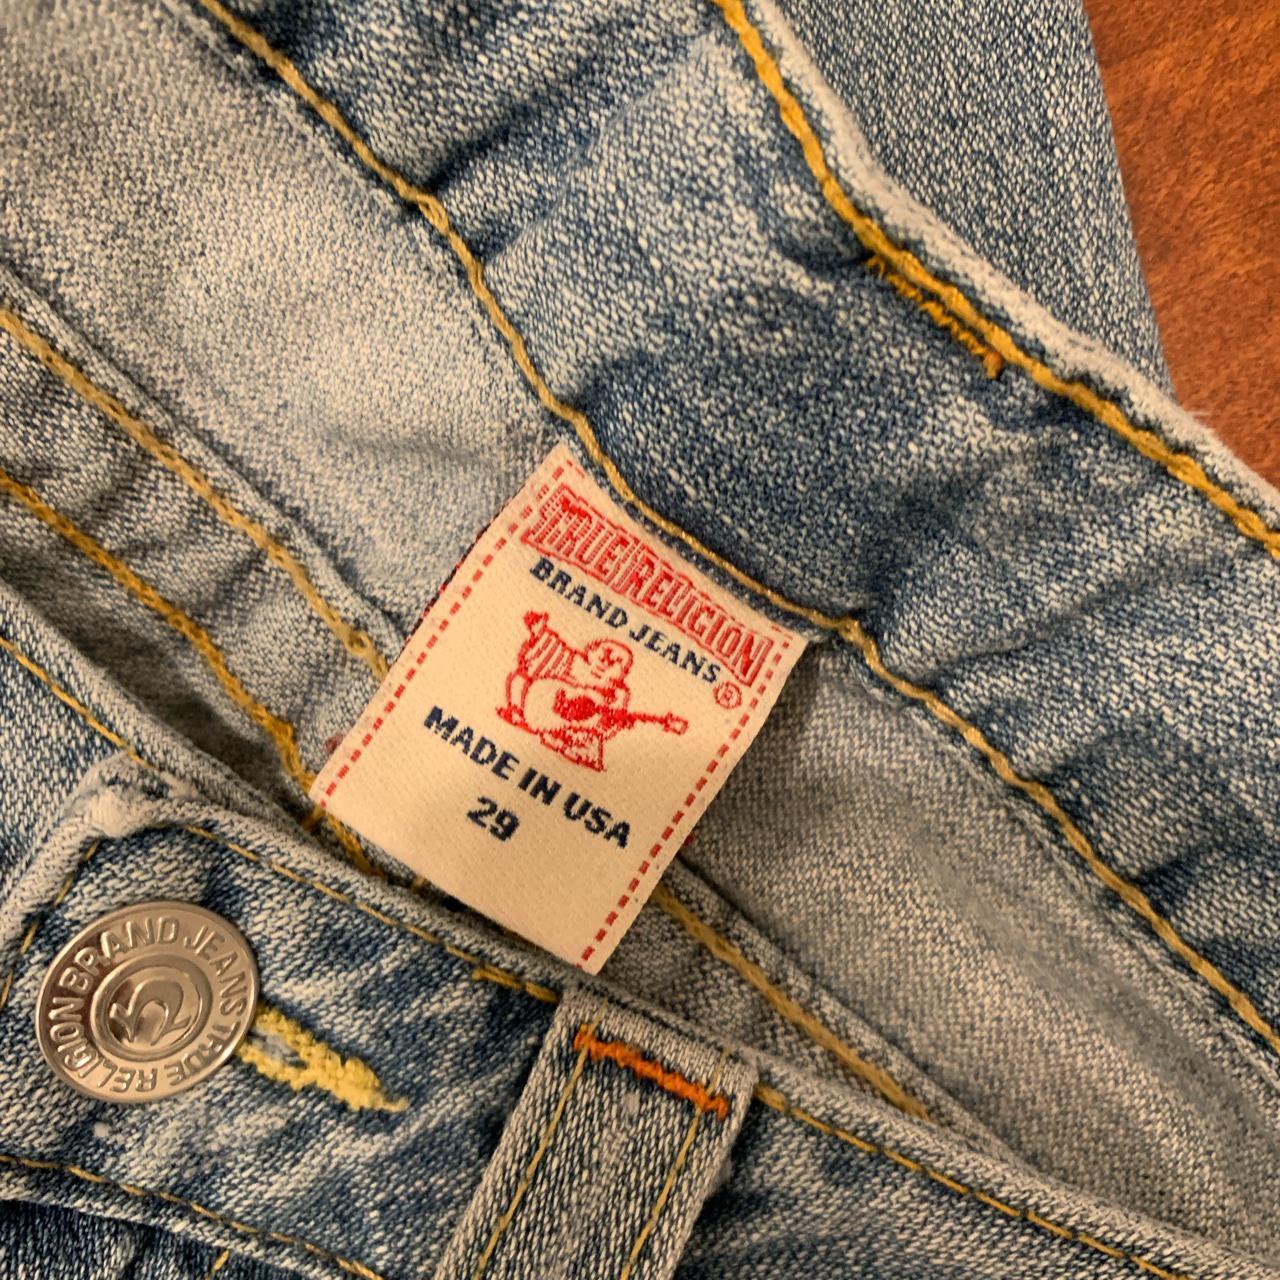 💙🐎 the perfect pair of y2k true religion jeans! low... - Depop